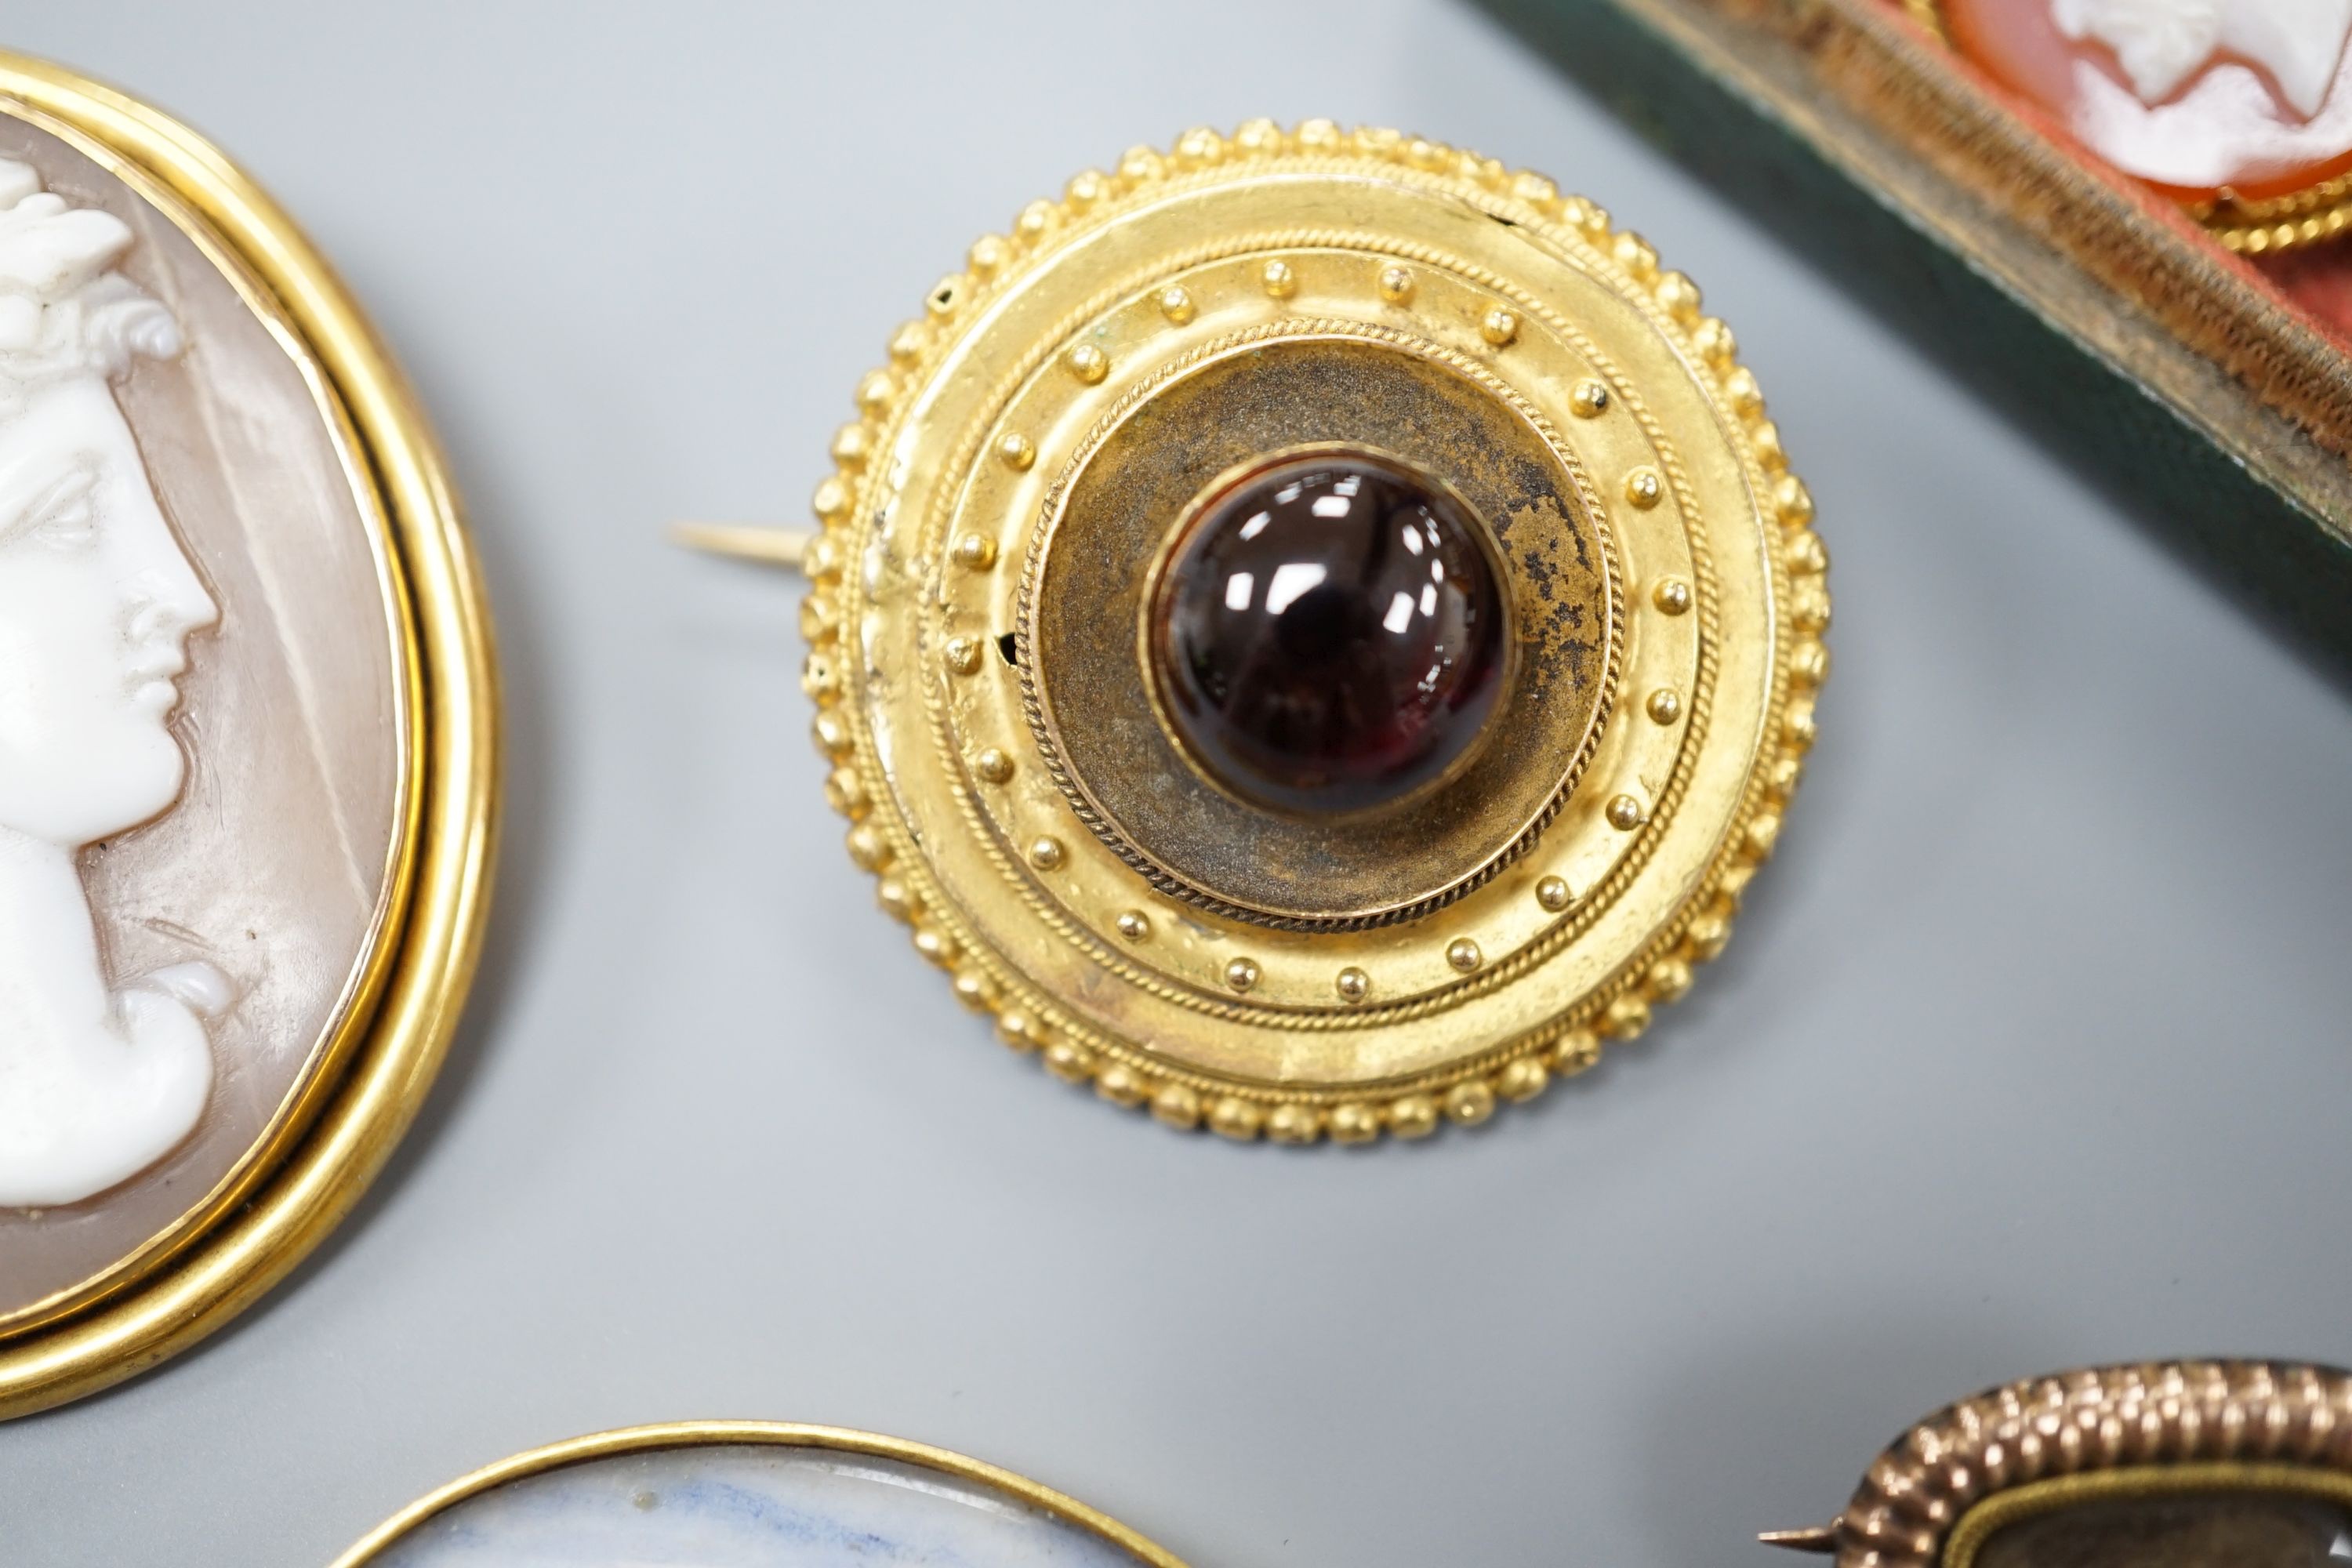 A Victorian yellow metal and cabochon garnet set circular brooch, 31mm, gross 9.3 grams, a stick pin with yellow metal and hardstone cameo set terminal, a mounted Indian miniature, a mounted cameo shell brooch and a Vict